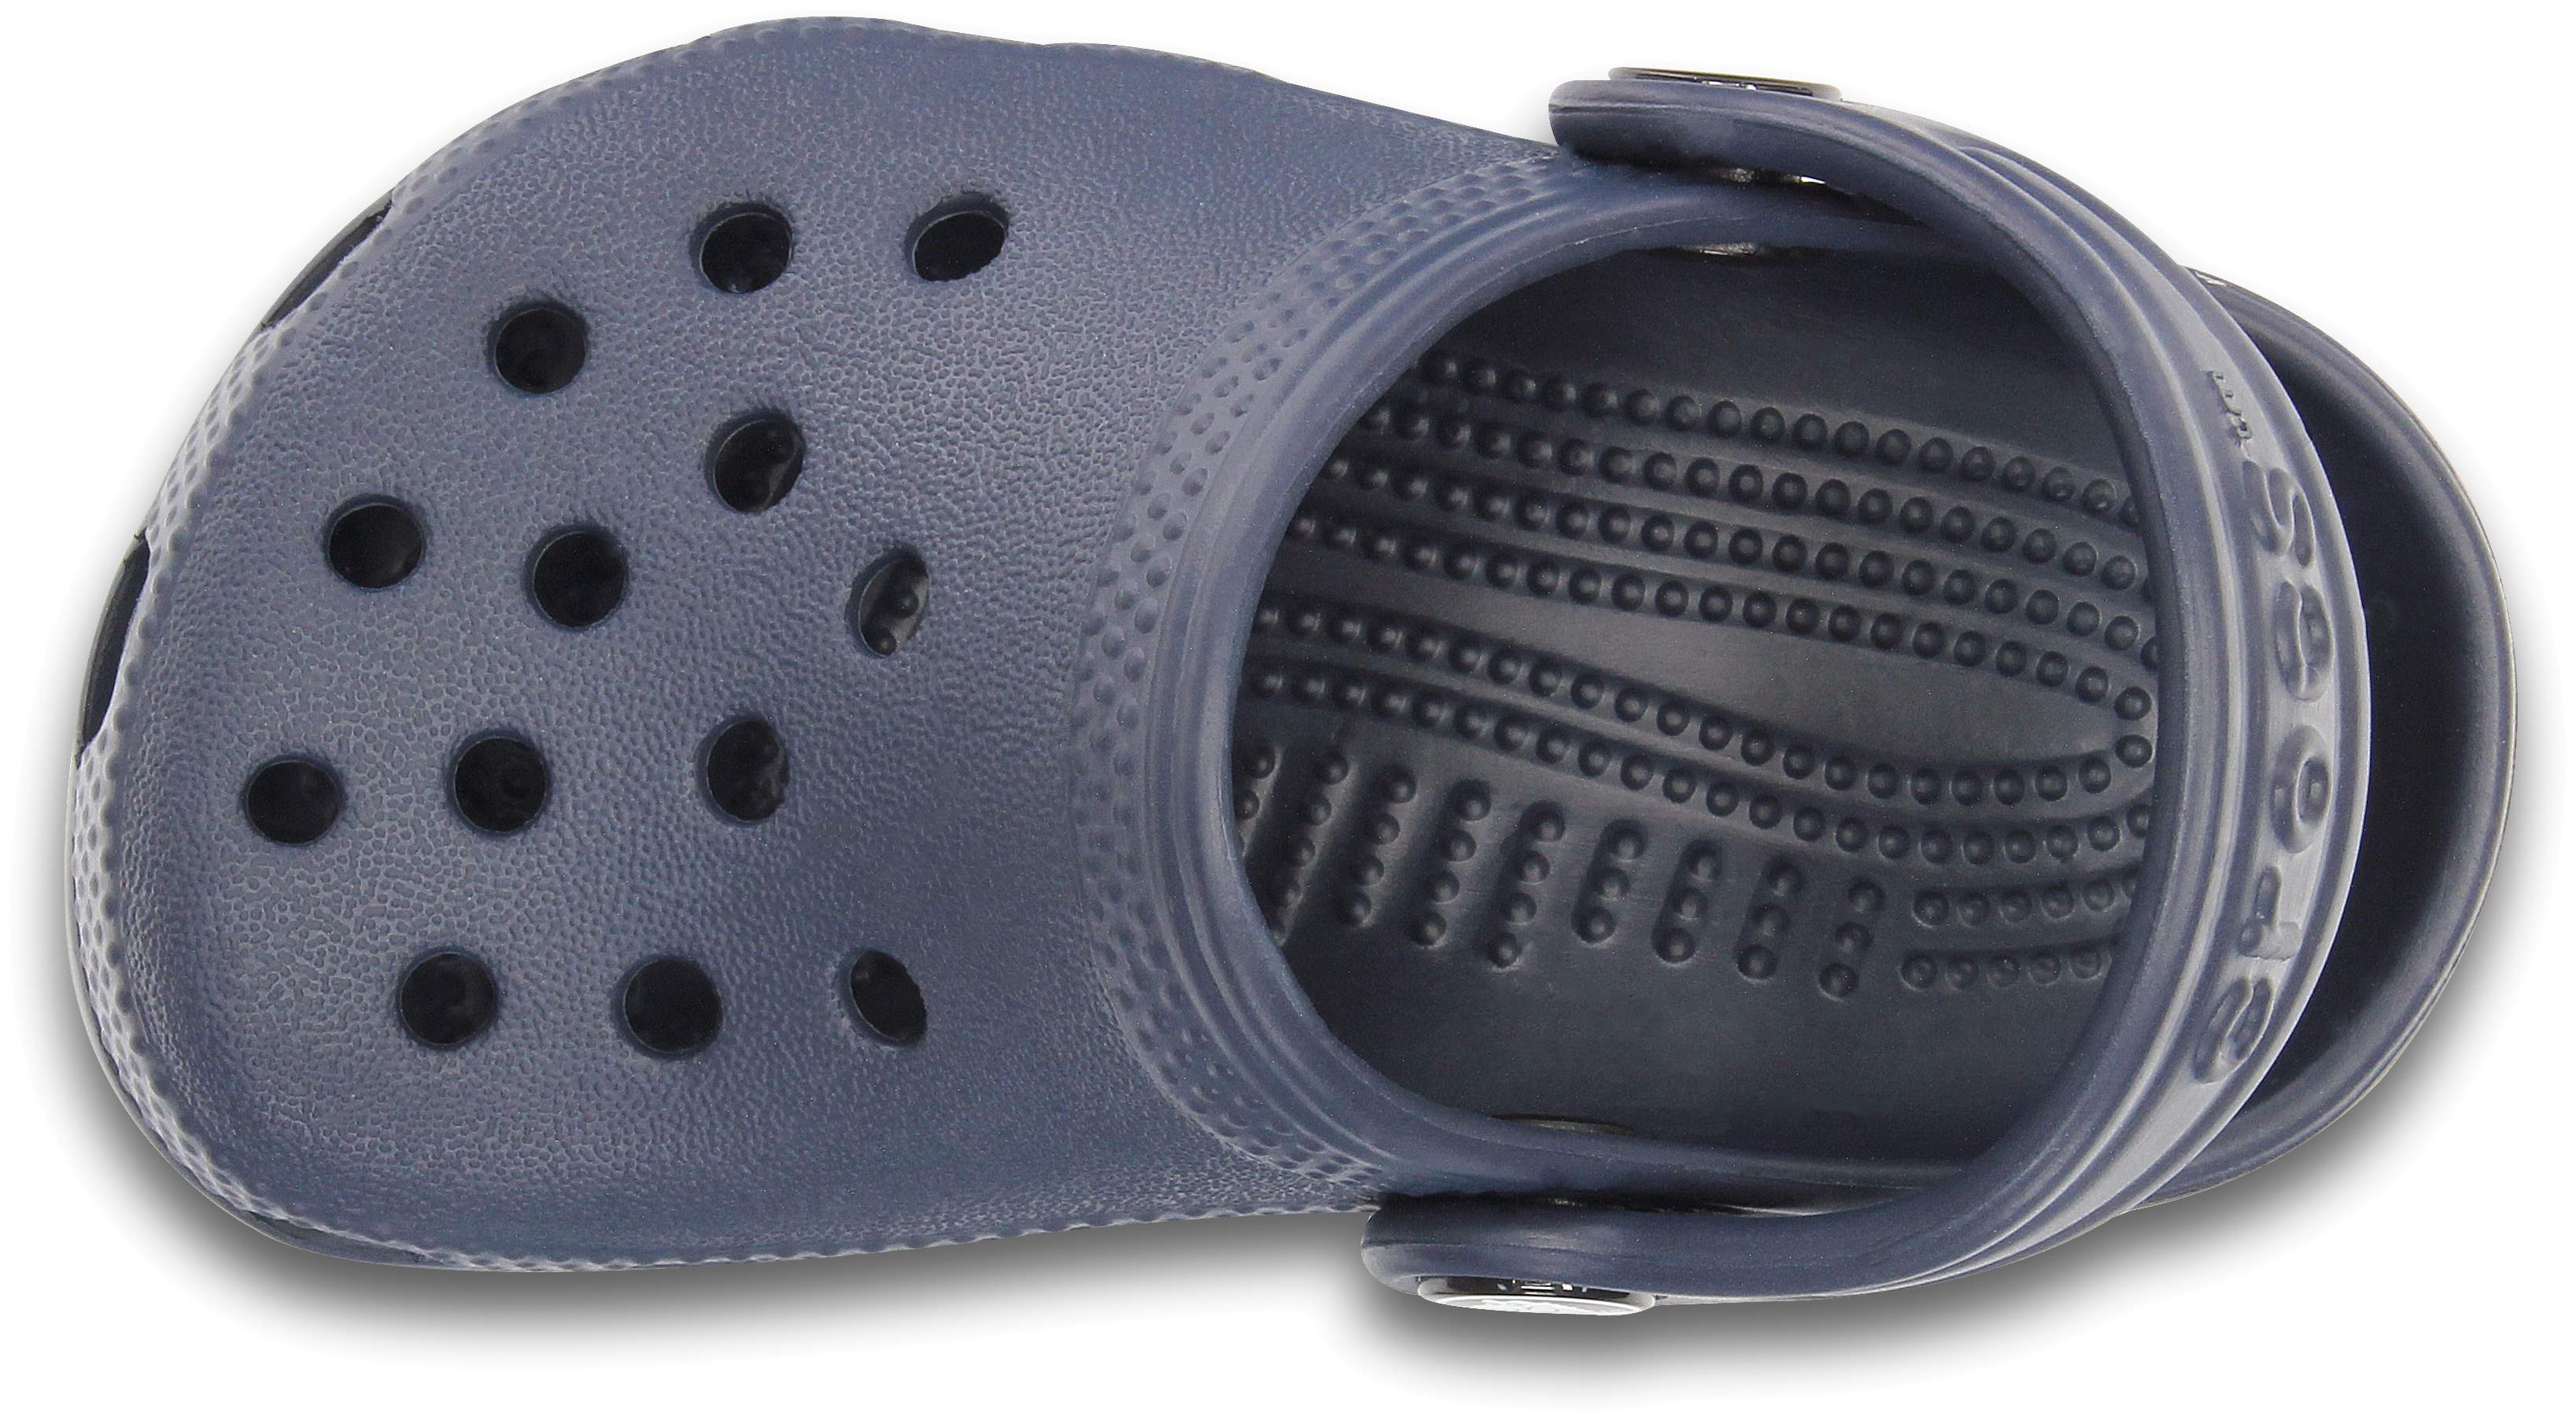 crocs size for 1 year old